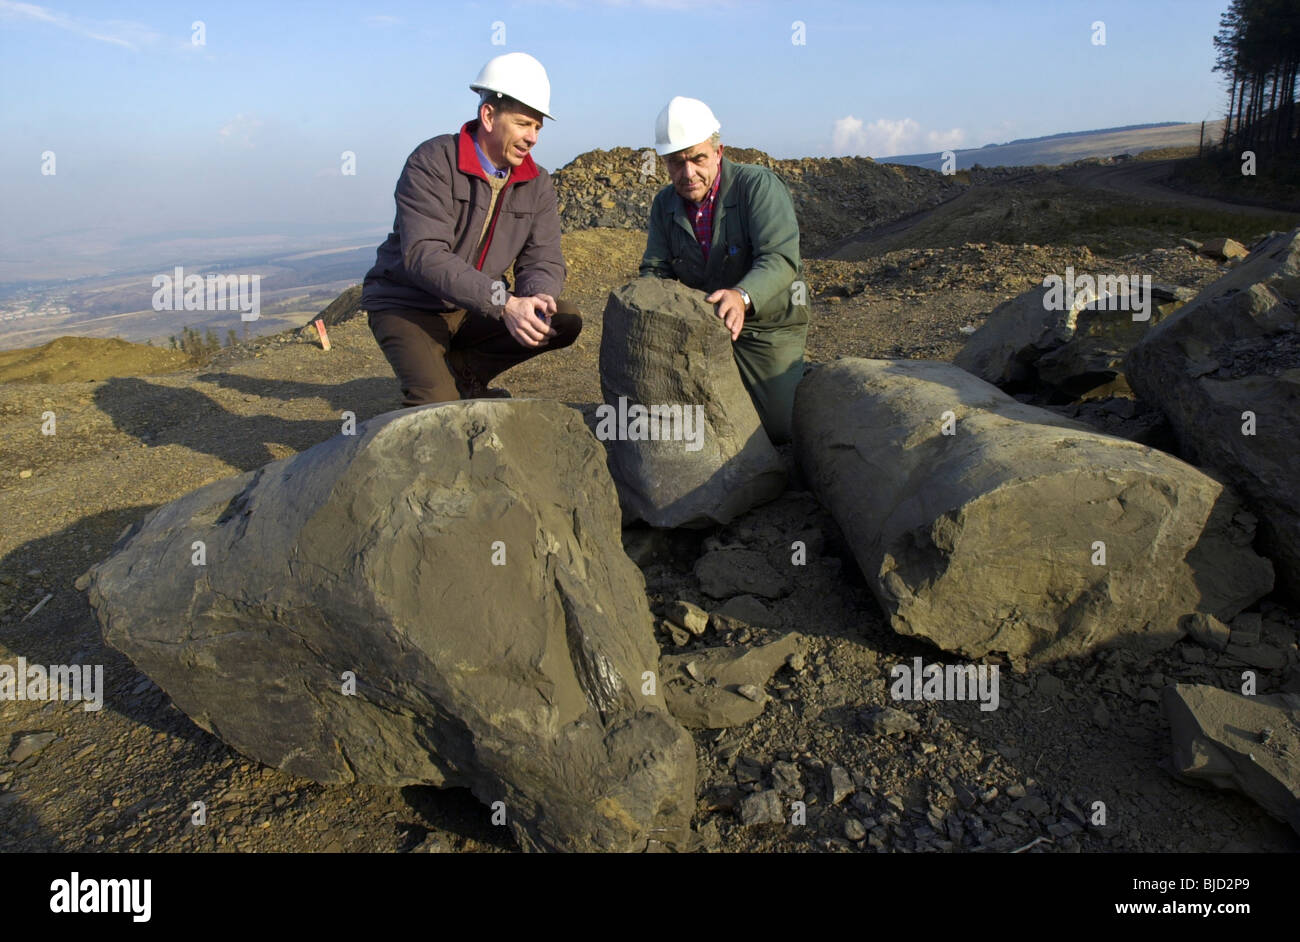 Geologists examine some of the 300 million year old fossilised trees preserved in the exposed mudstone at an opencast site Stock Photo